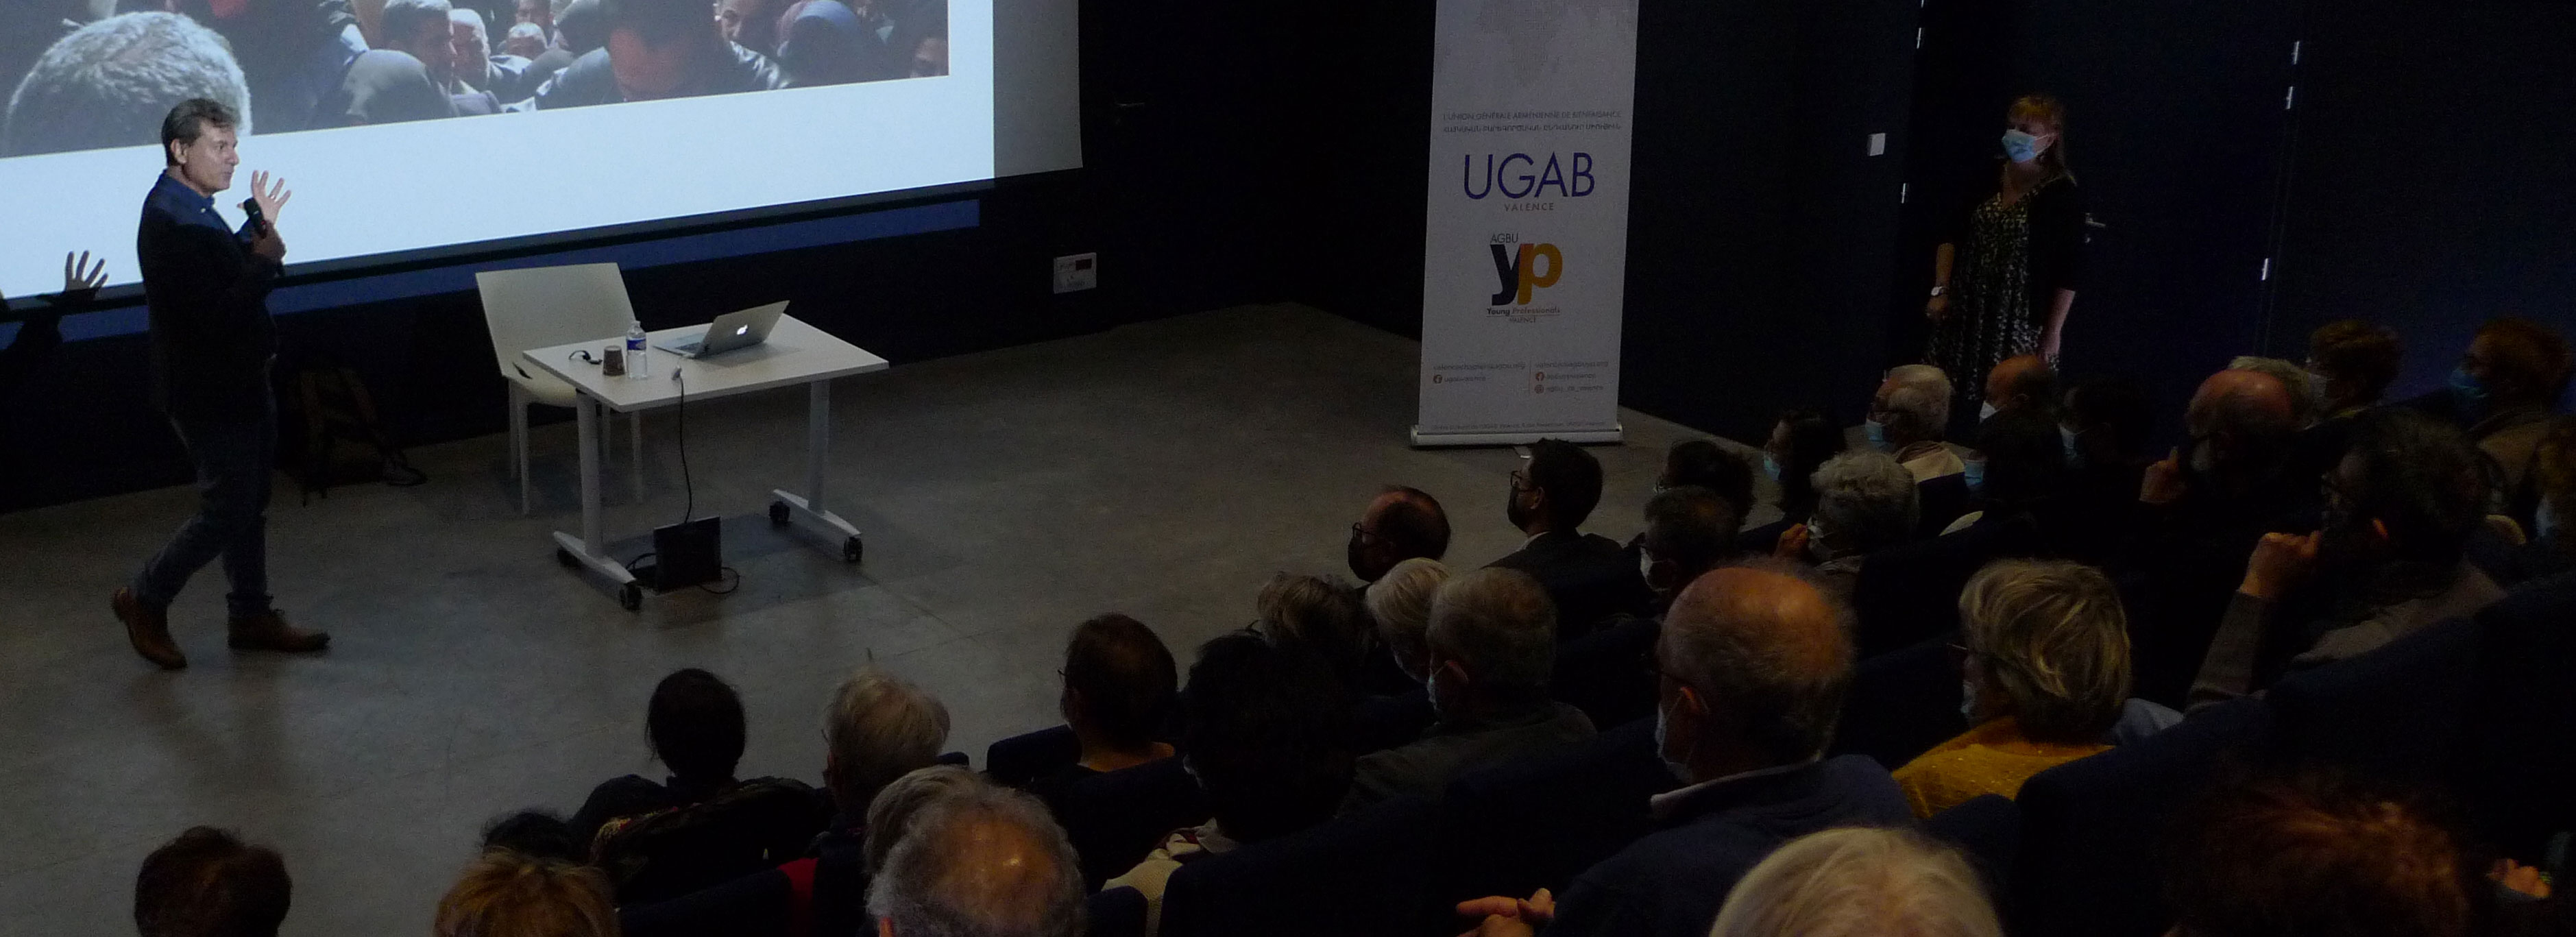 AGBU co-organizes Lecture in Valence Examining Roots of Mass Violence in Middle East Today